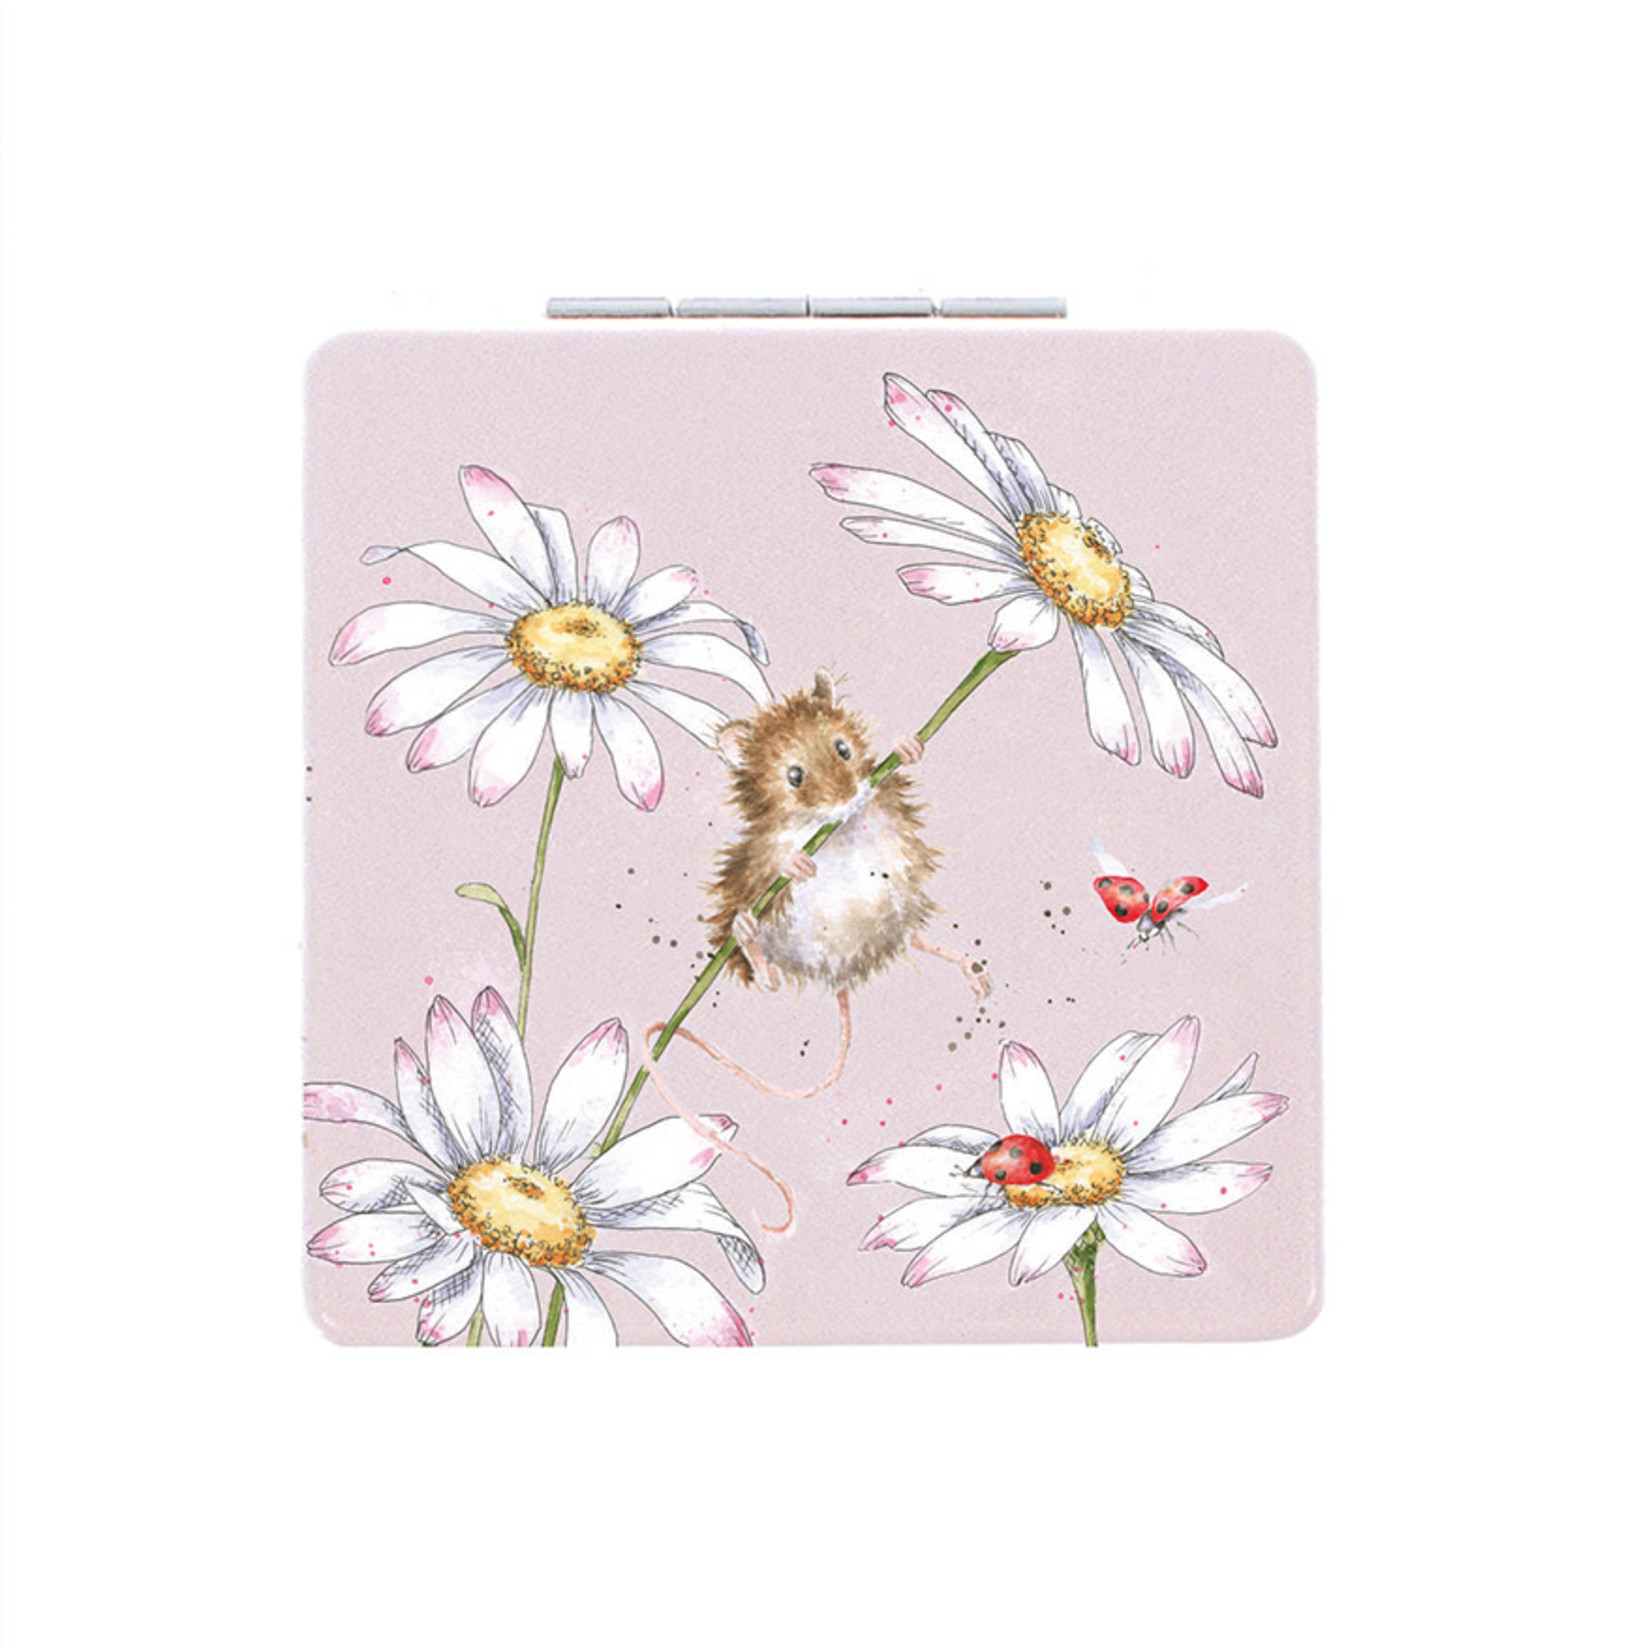 Wrendale Designs Compact Mirror - 'Oops A Daisy' Mouse (MR012)